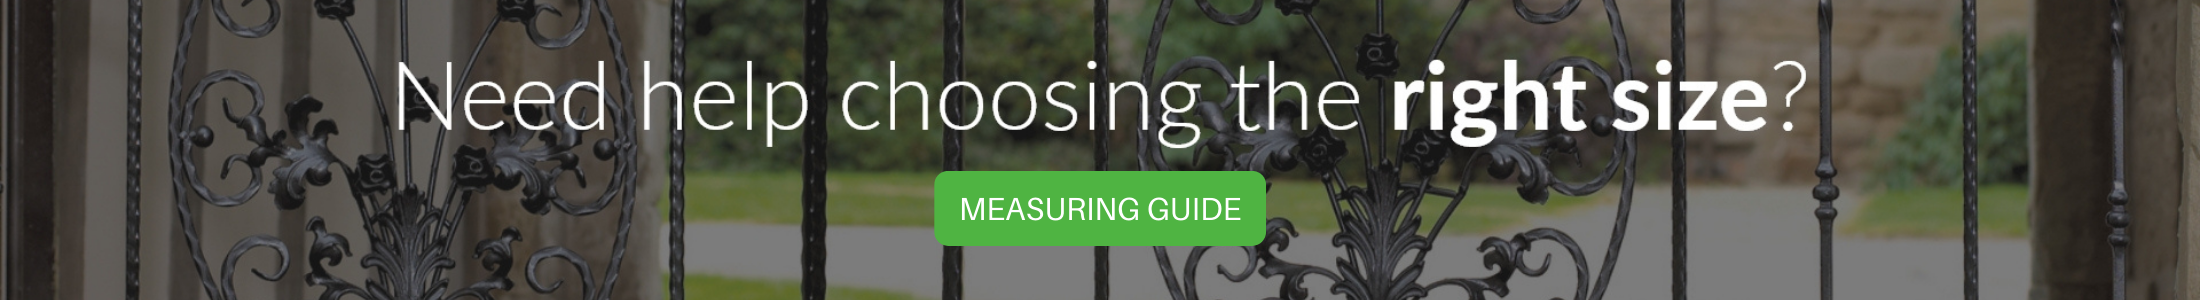 Need help selecting the right size? View the measuring guide for help and advice